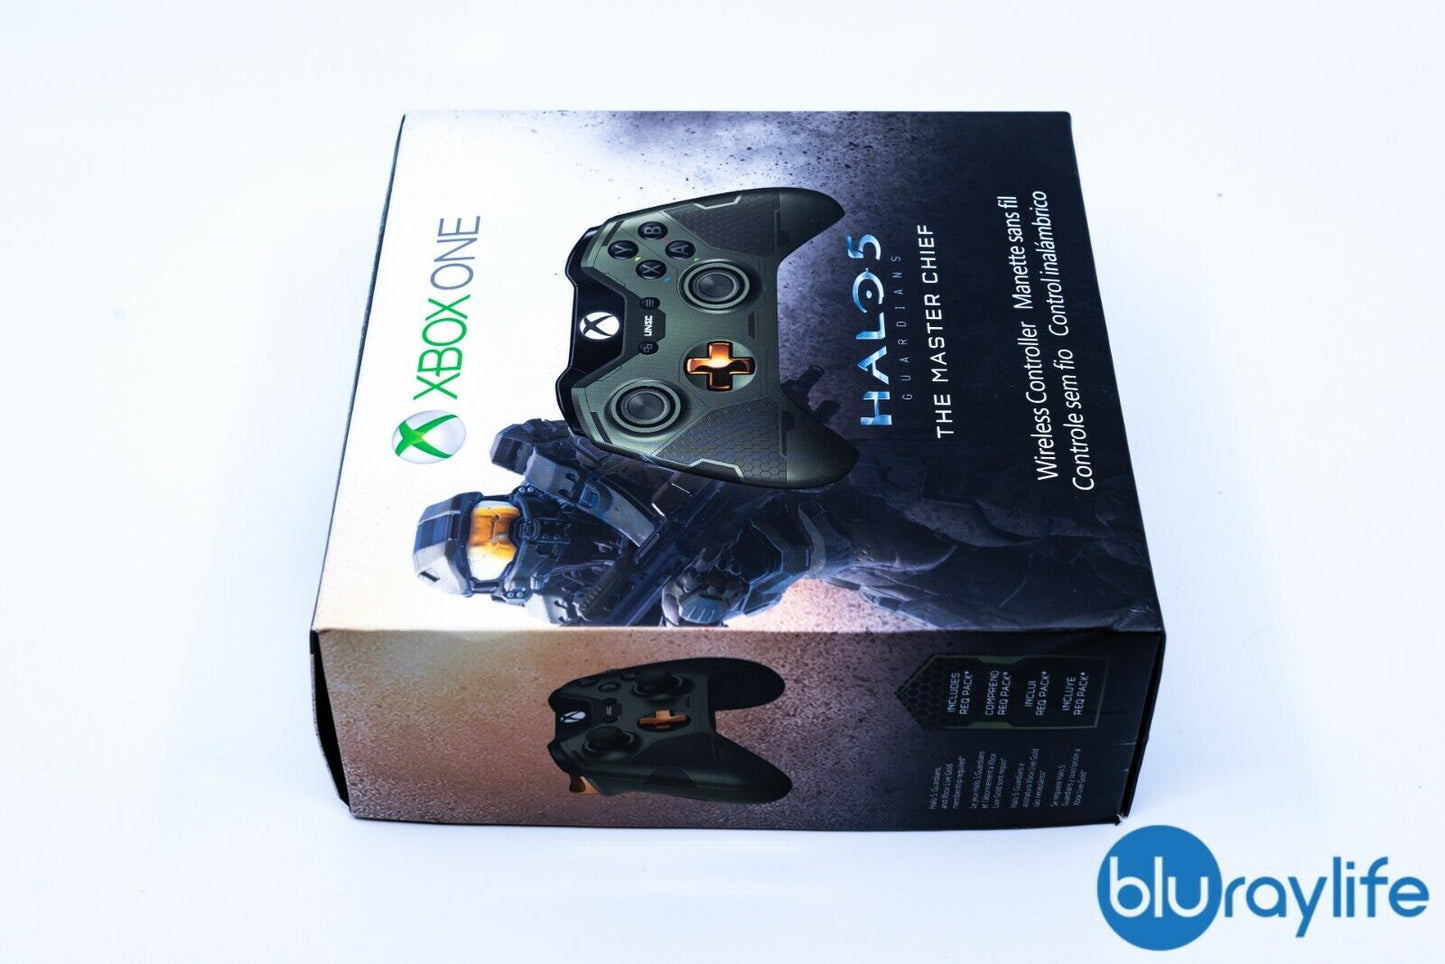 Microsoft Halo 5: Guardians - Xbox One The Master Chief Controller